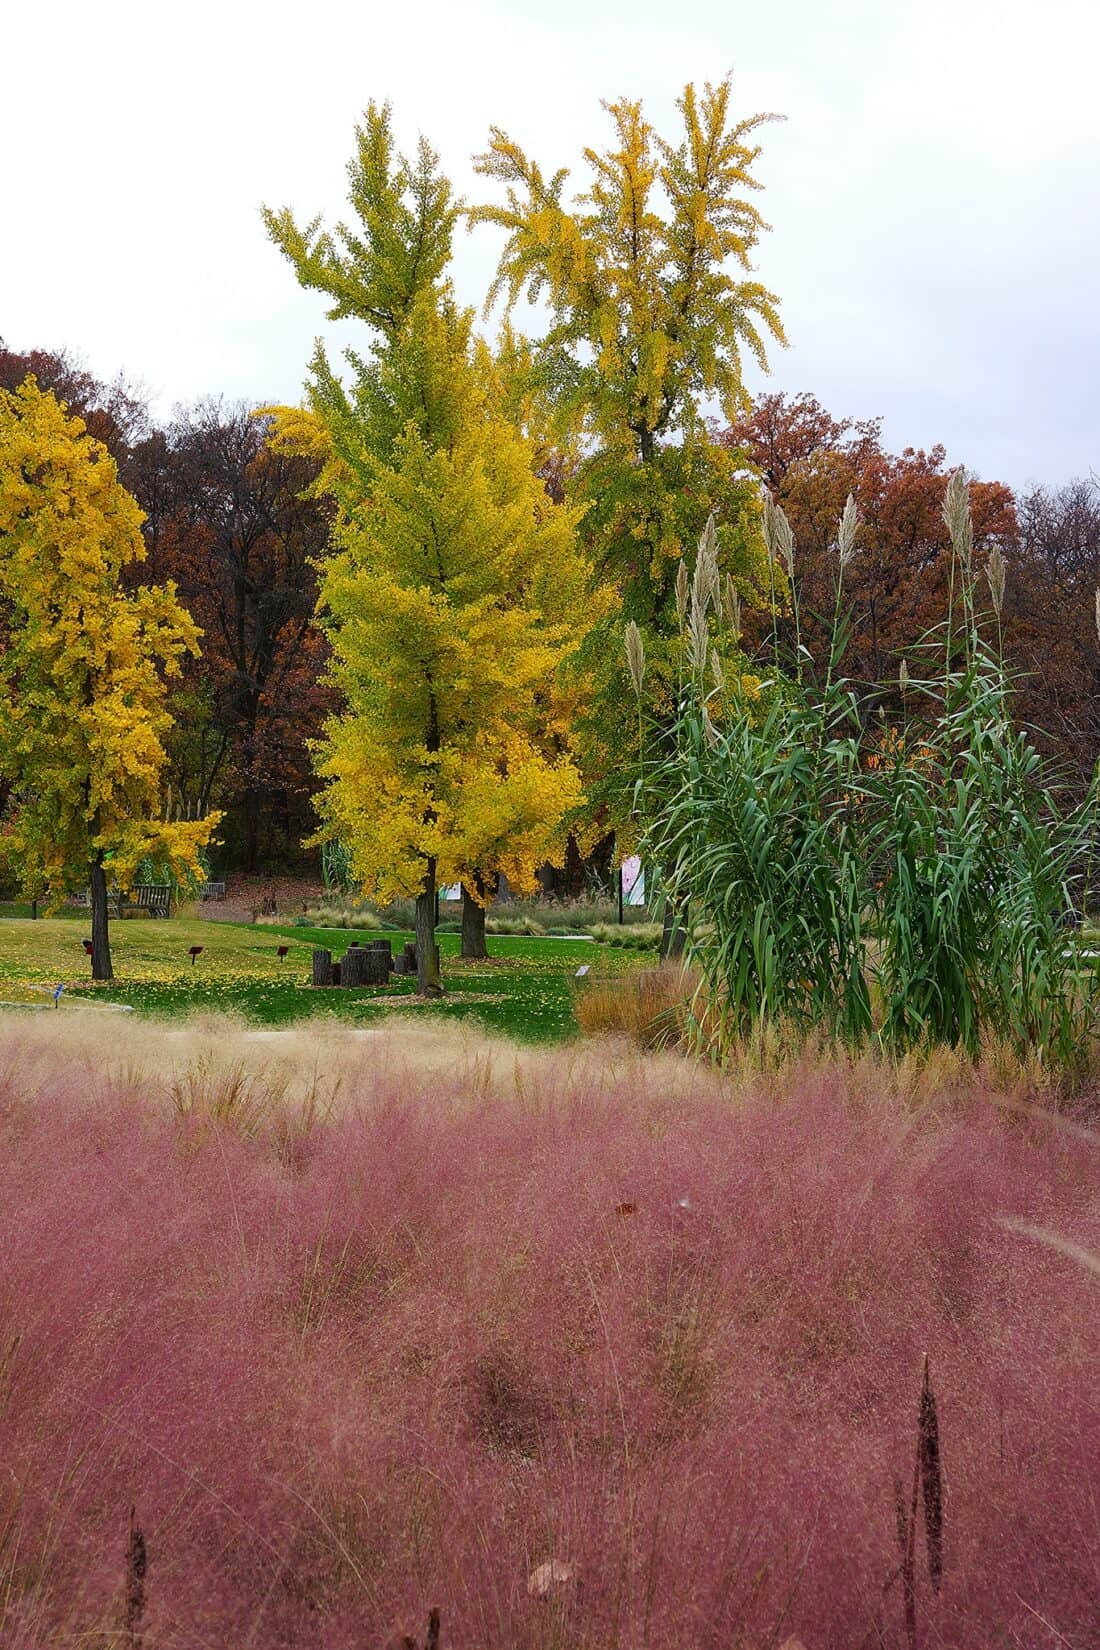 Pink muhly grass and yellowing ginkgo biloba trees